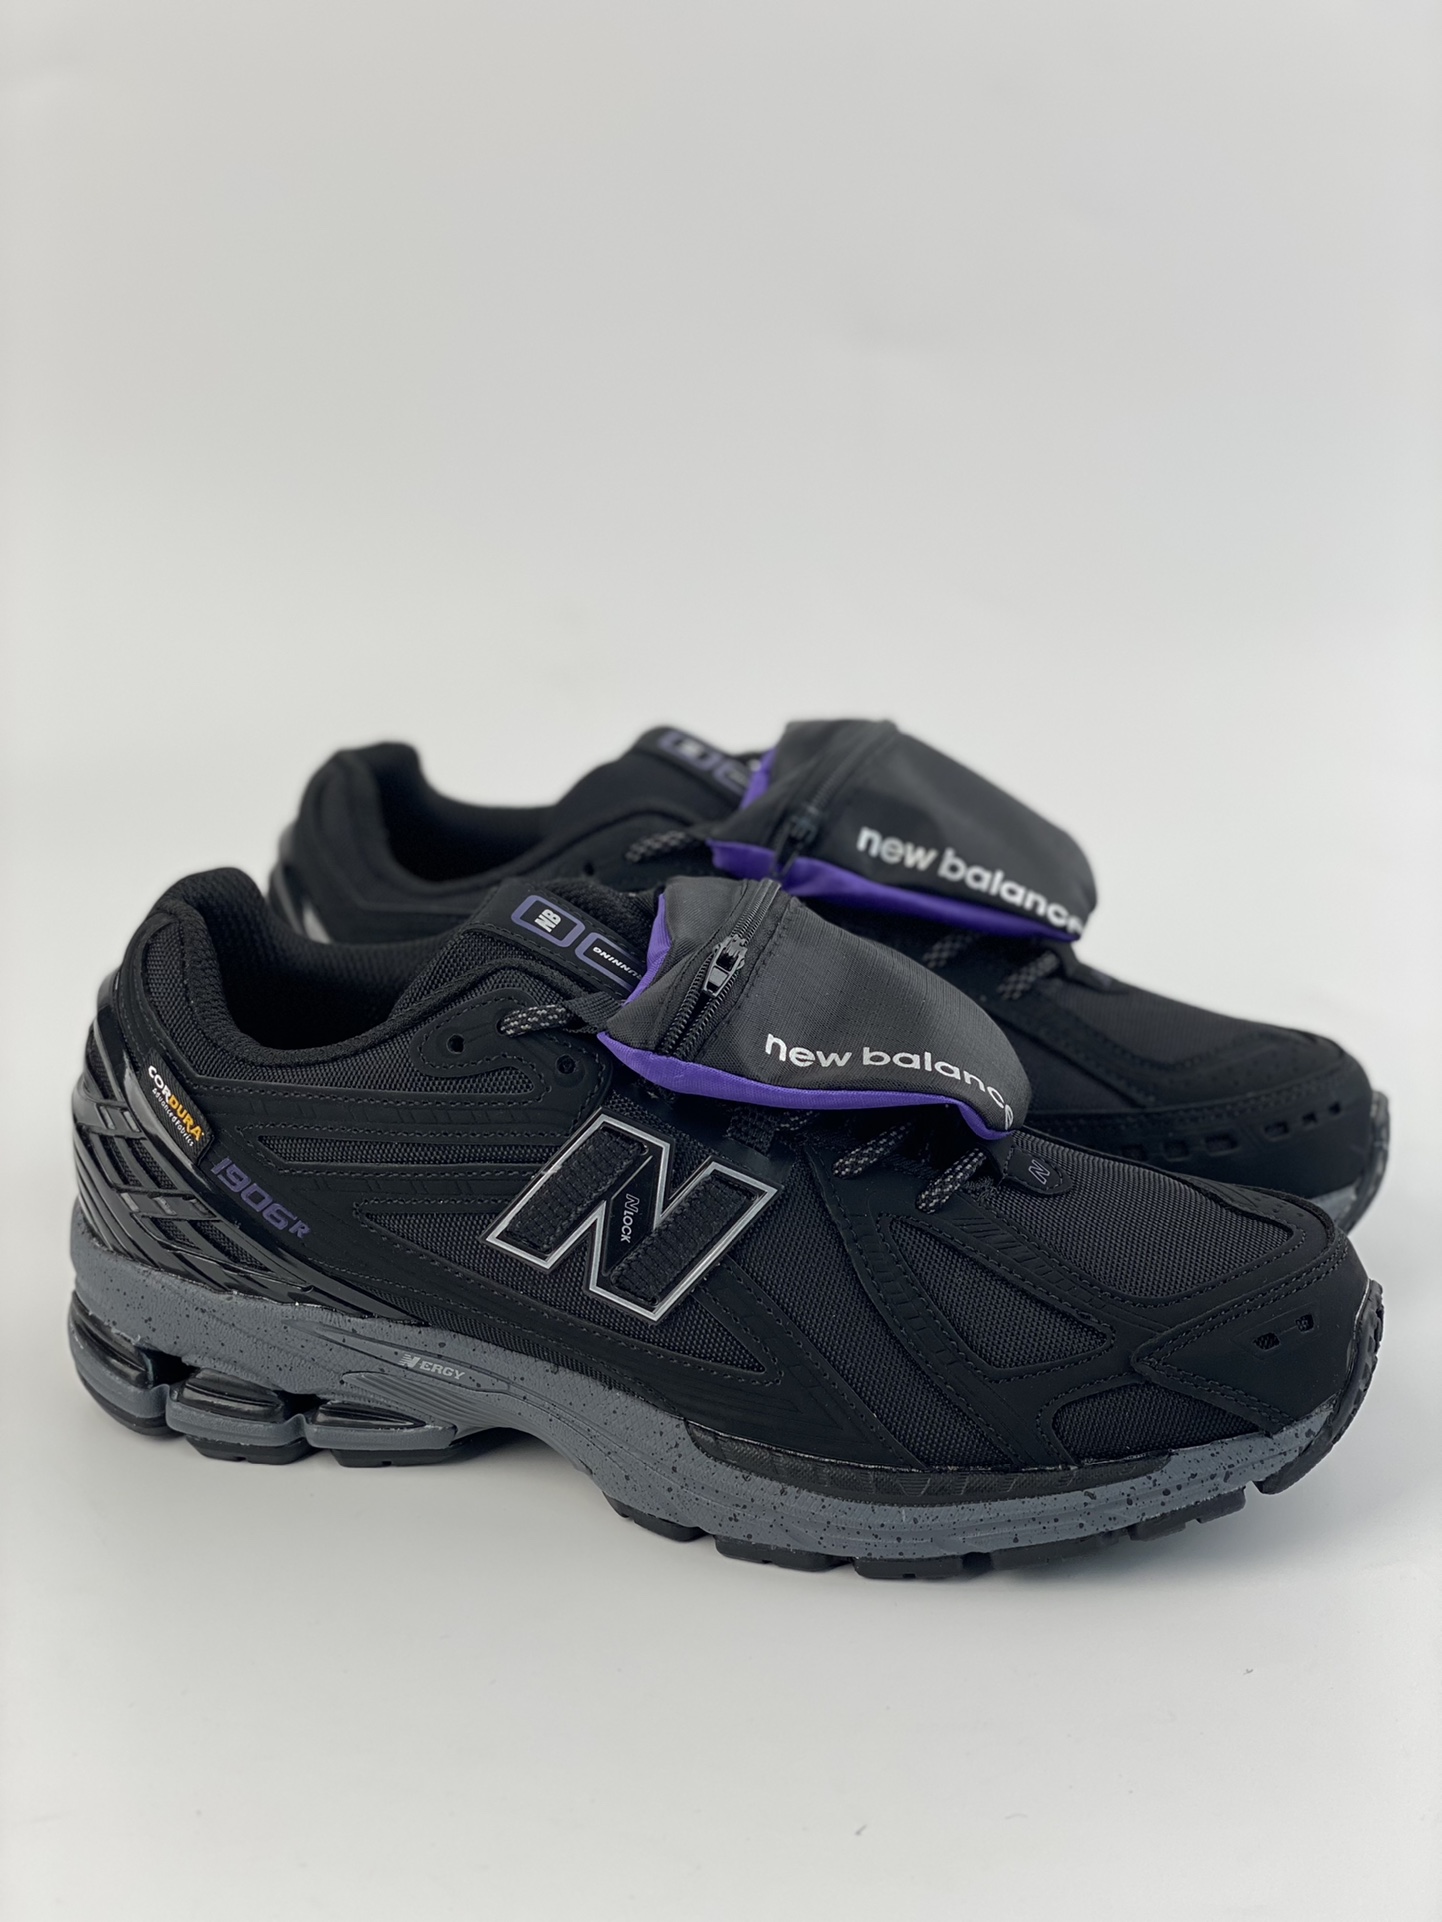 New Balance 1906 series of retro -old daddy leisure sports jogging shoes M1906roc